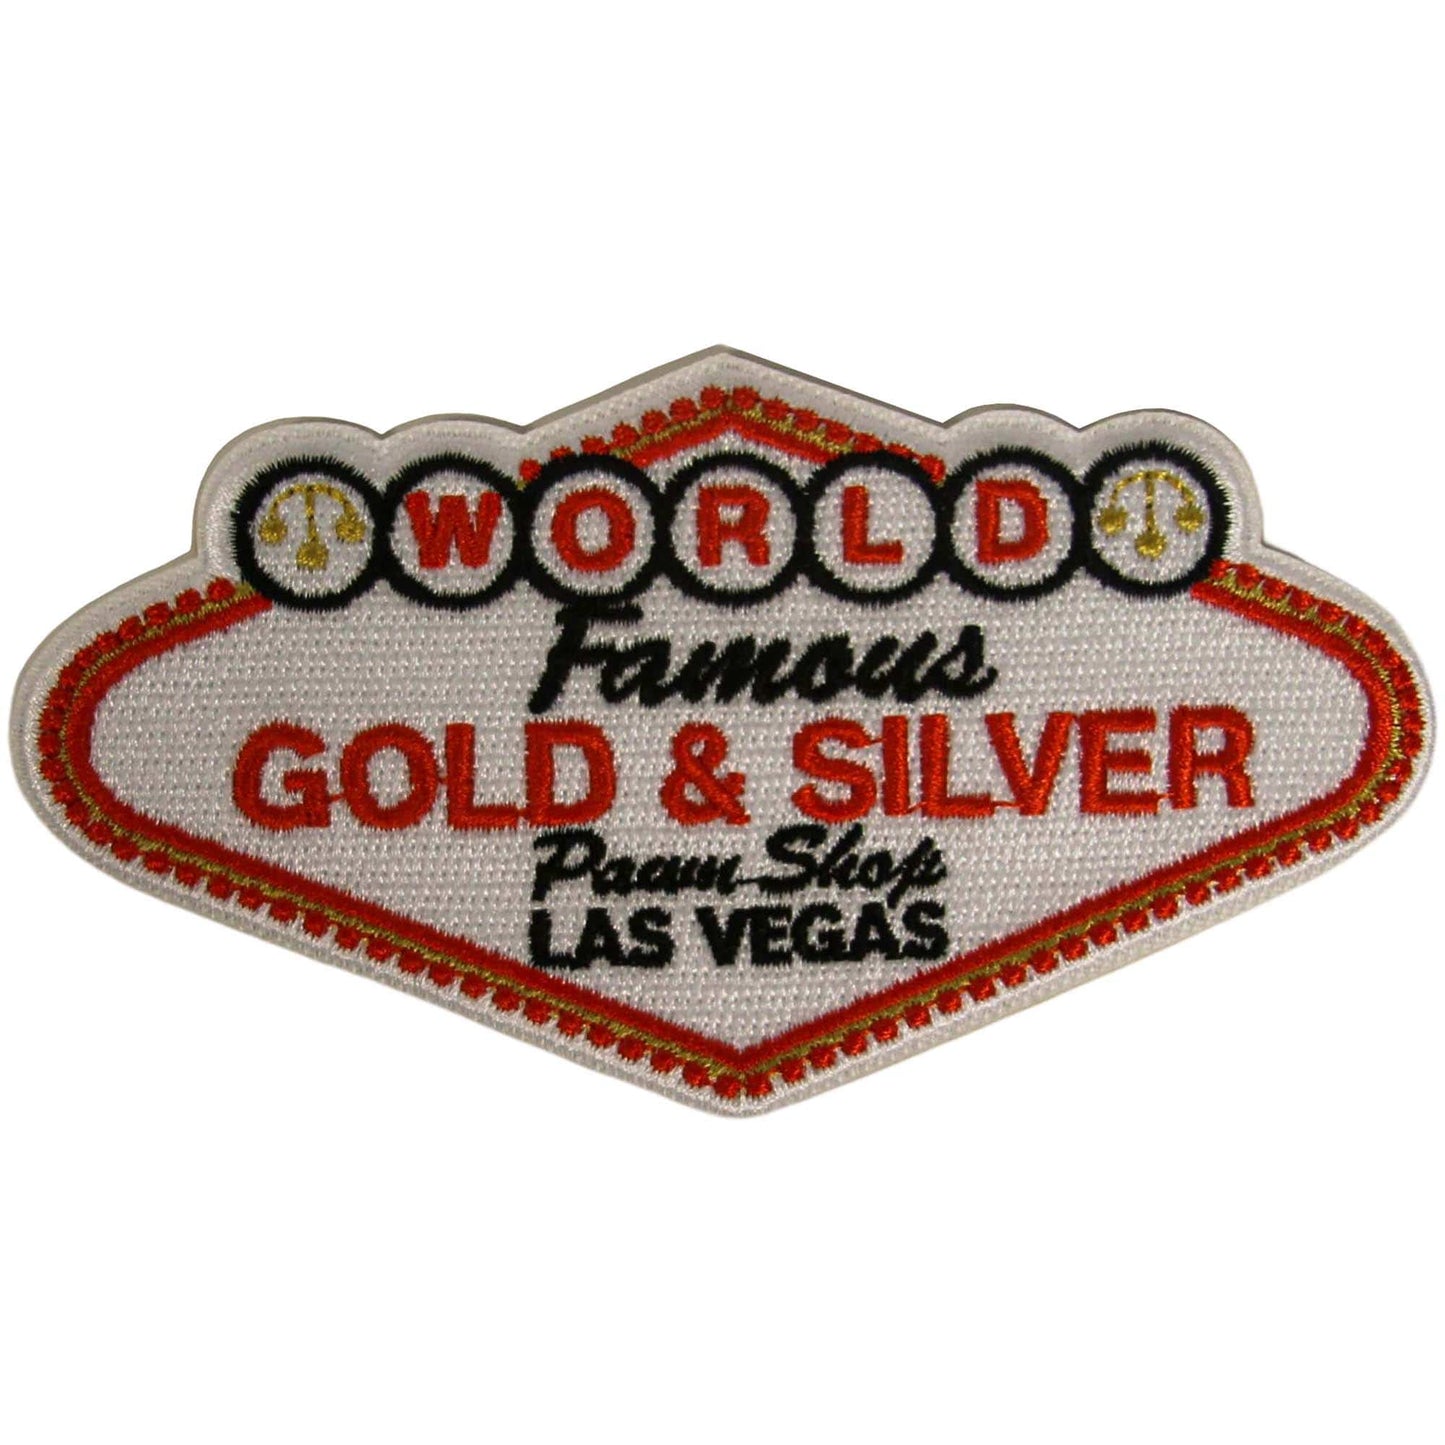 The World Famous Gold & Silver Pawn Shop Patches Las Vegas Sign